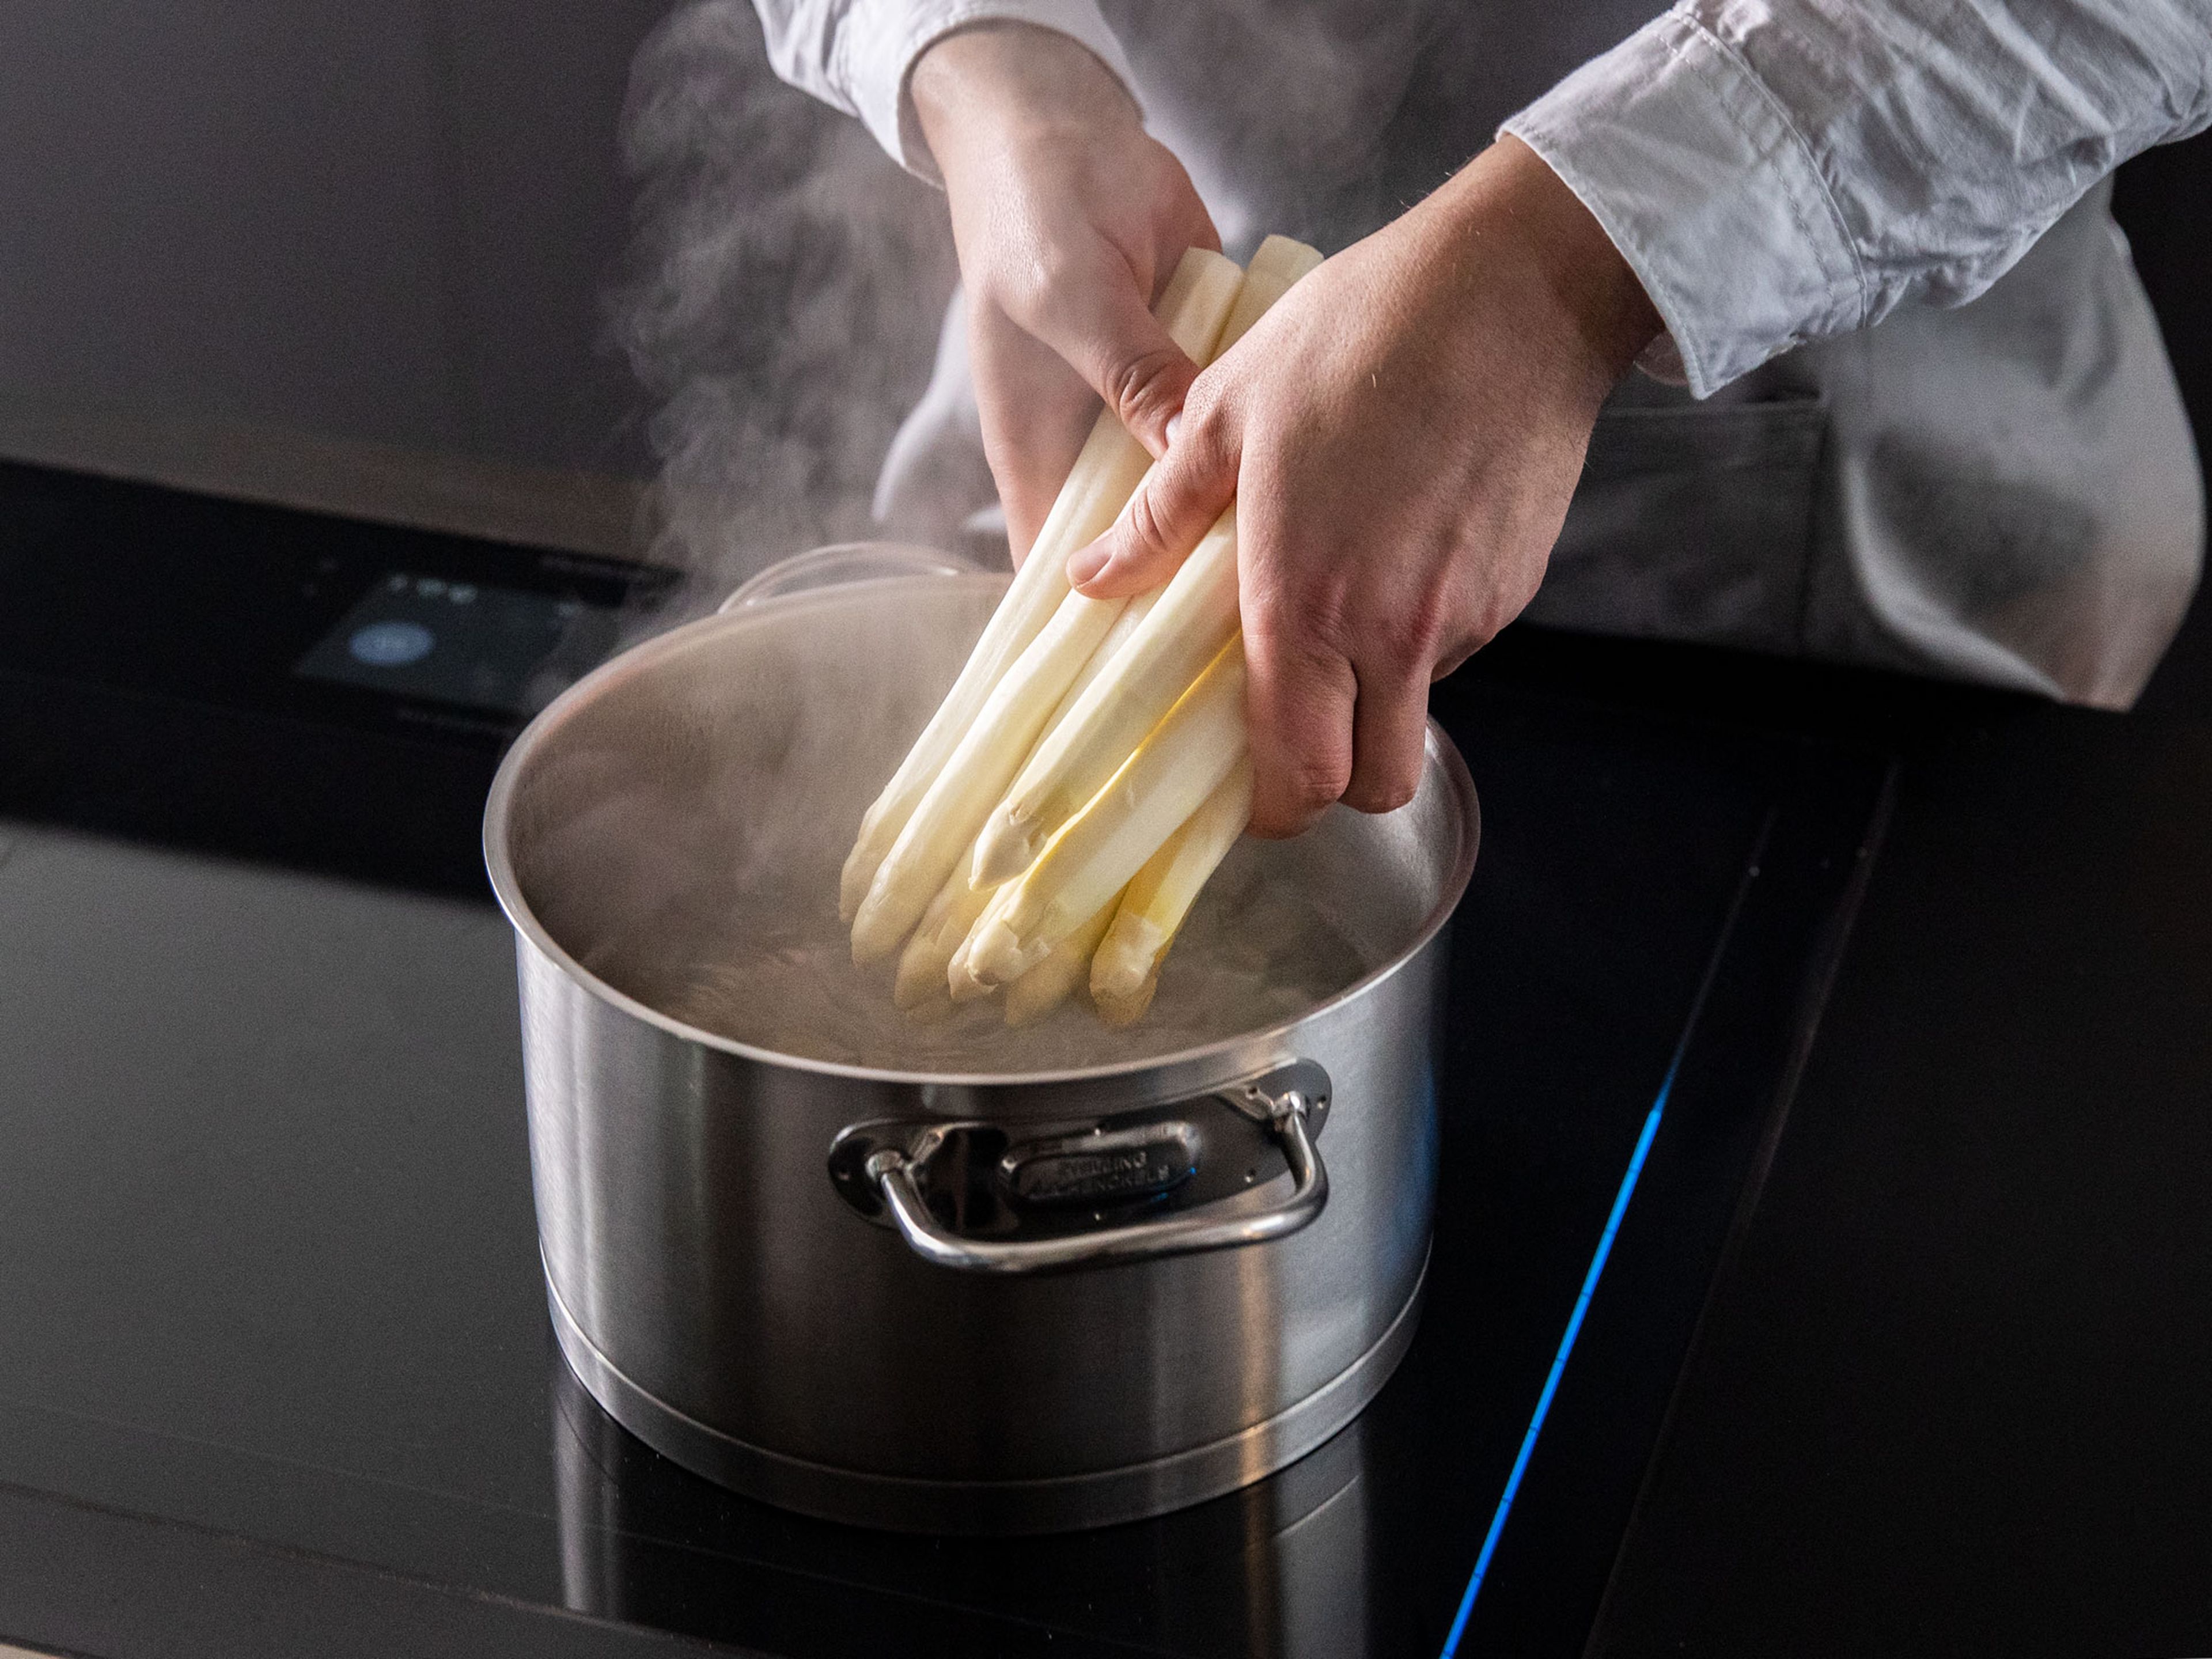 Fill a pot with water, add remaining lemon juice. Season with salt and sugar generously. Bring to a boil, and add white asparagus to the pot. Let cook for approx. 8 – 15 min., depending on the size and desired doneness. Serve asparagus with Béarnaise sauce, cooked potatoes, and ham. Enjoy!